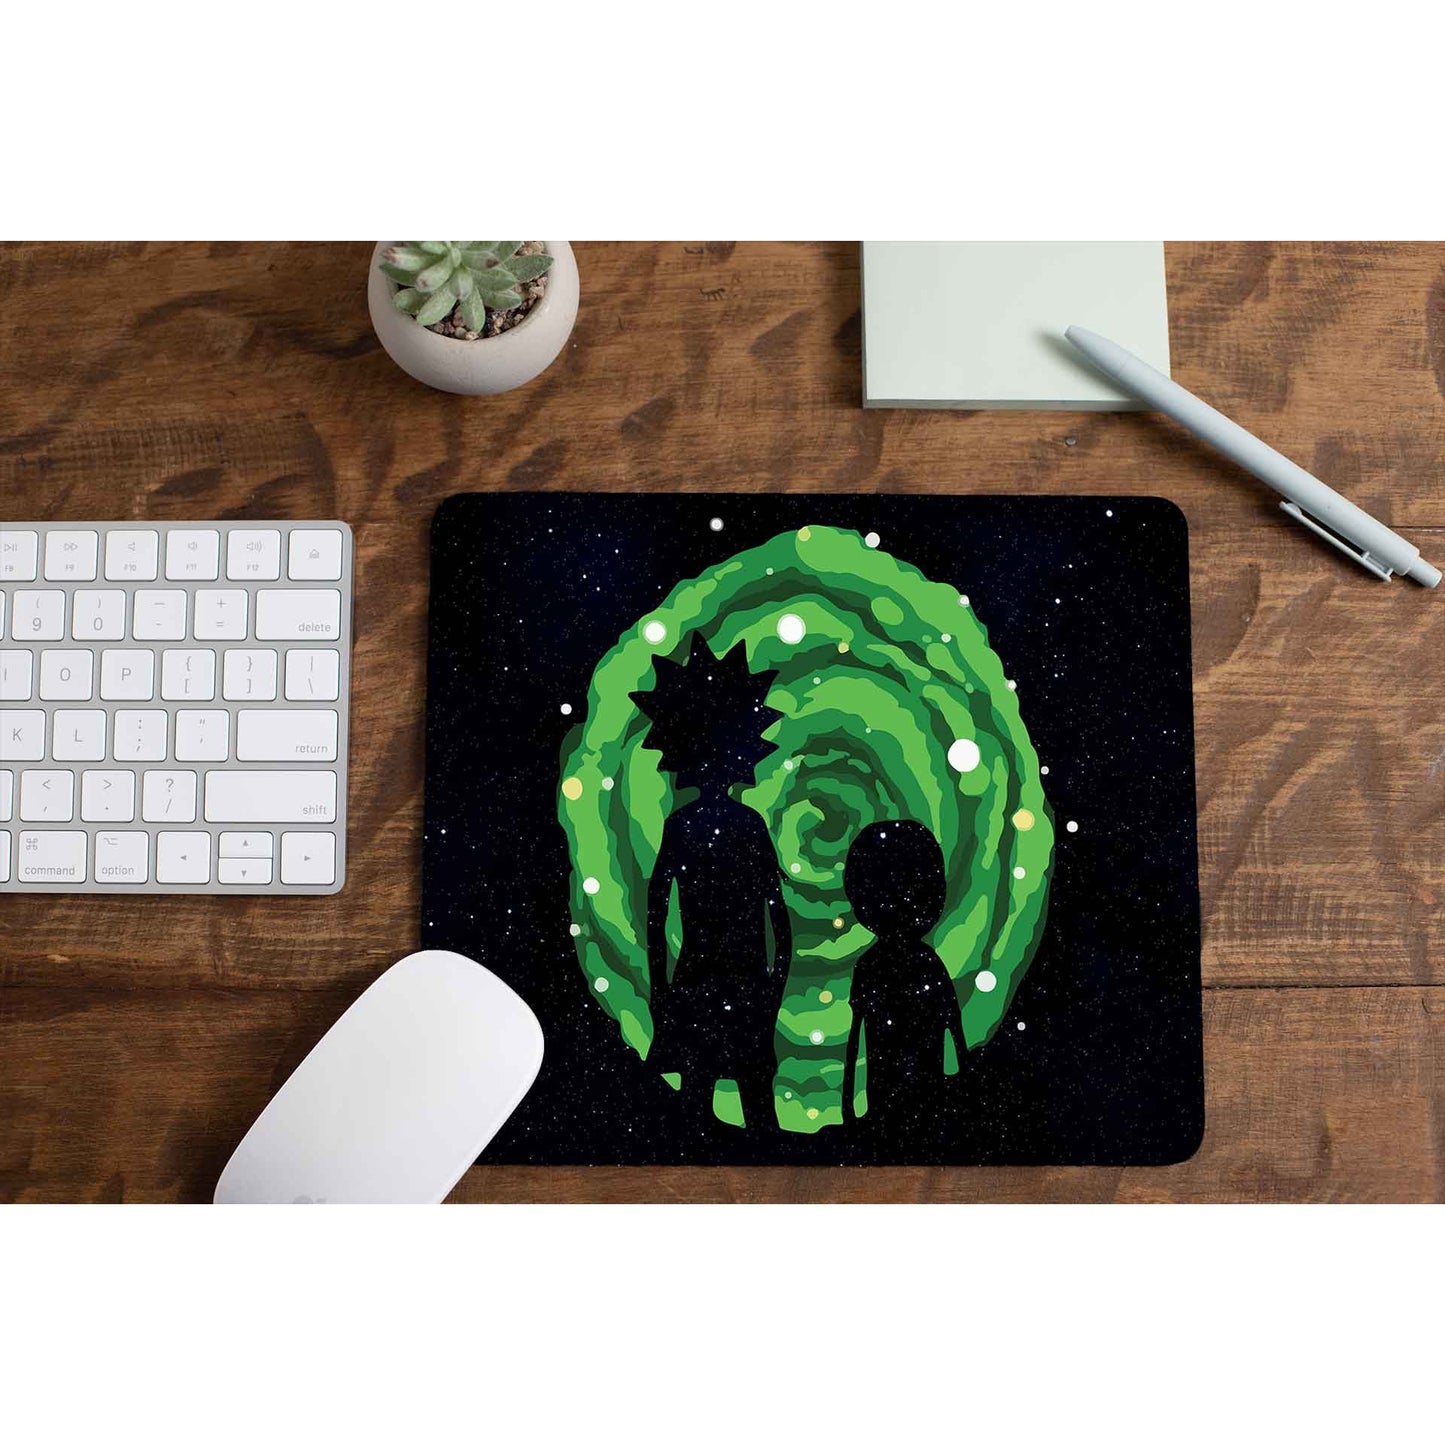 rick and morty portal mousepad logitech large anime buy online india the banyan tee tbt men women girls boys unisex  rick and morty online summer beth mr meeseeks jerry quote vector art clothing accessories merchandise